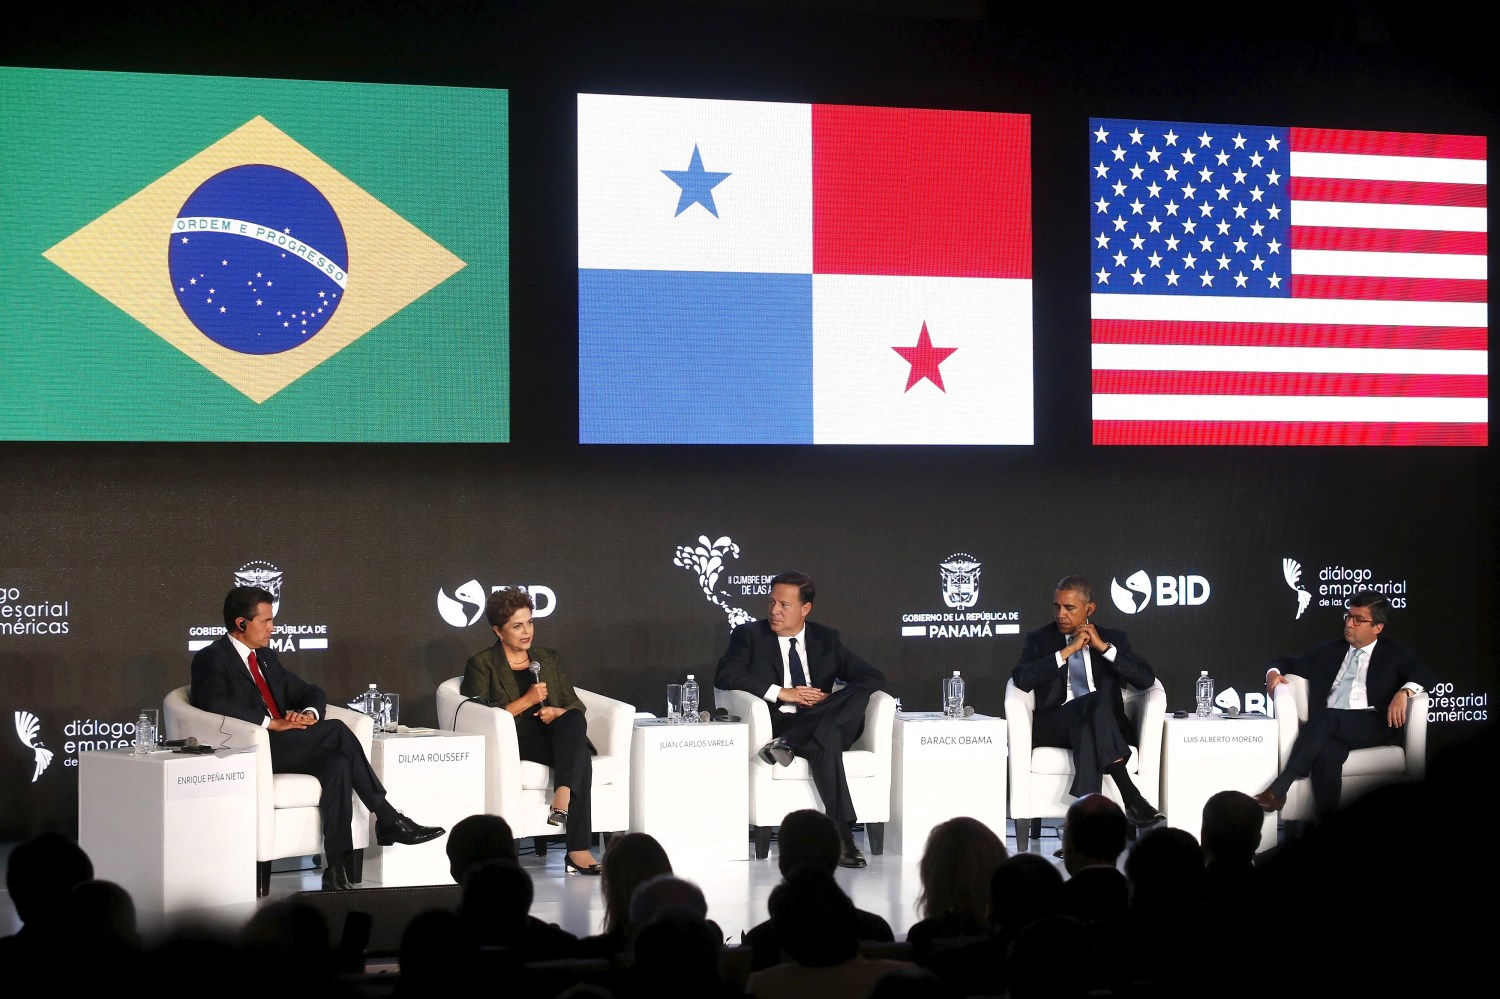 Nieto, Rousseff, Varela, Obama and Moreno talk to business leaders at the CEO Summit of the Americas in Panama City, Panama